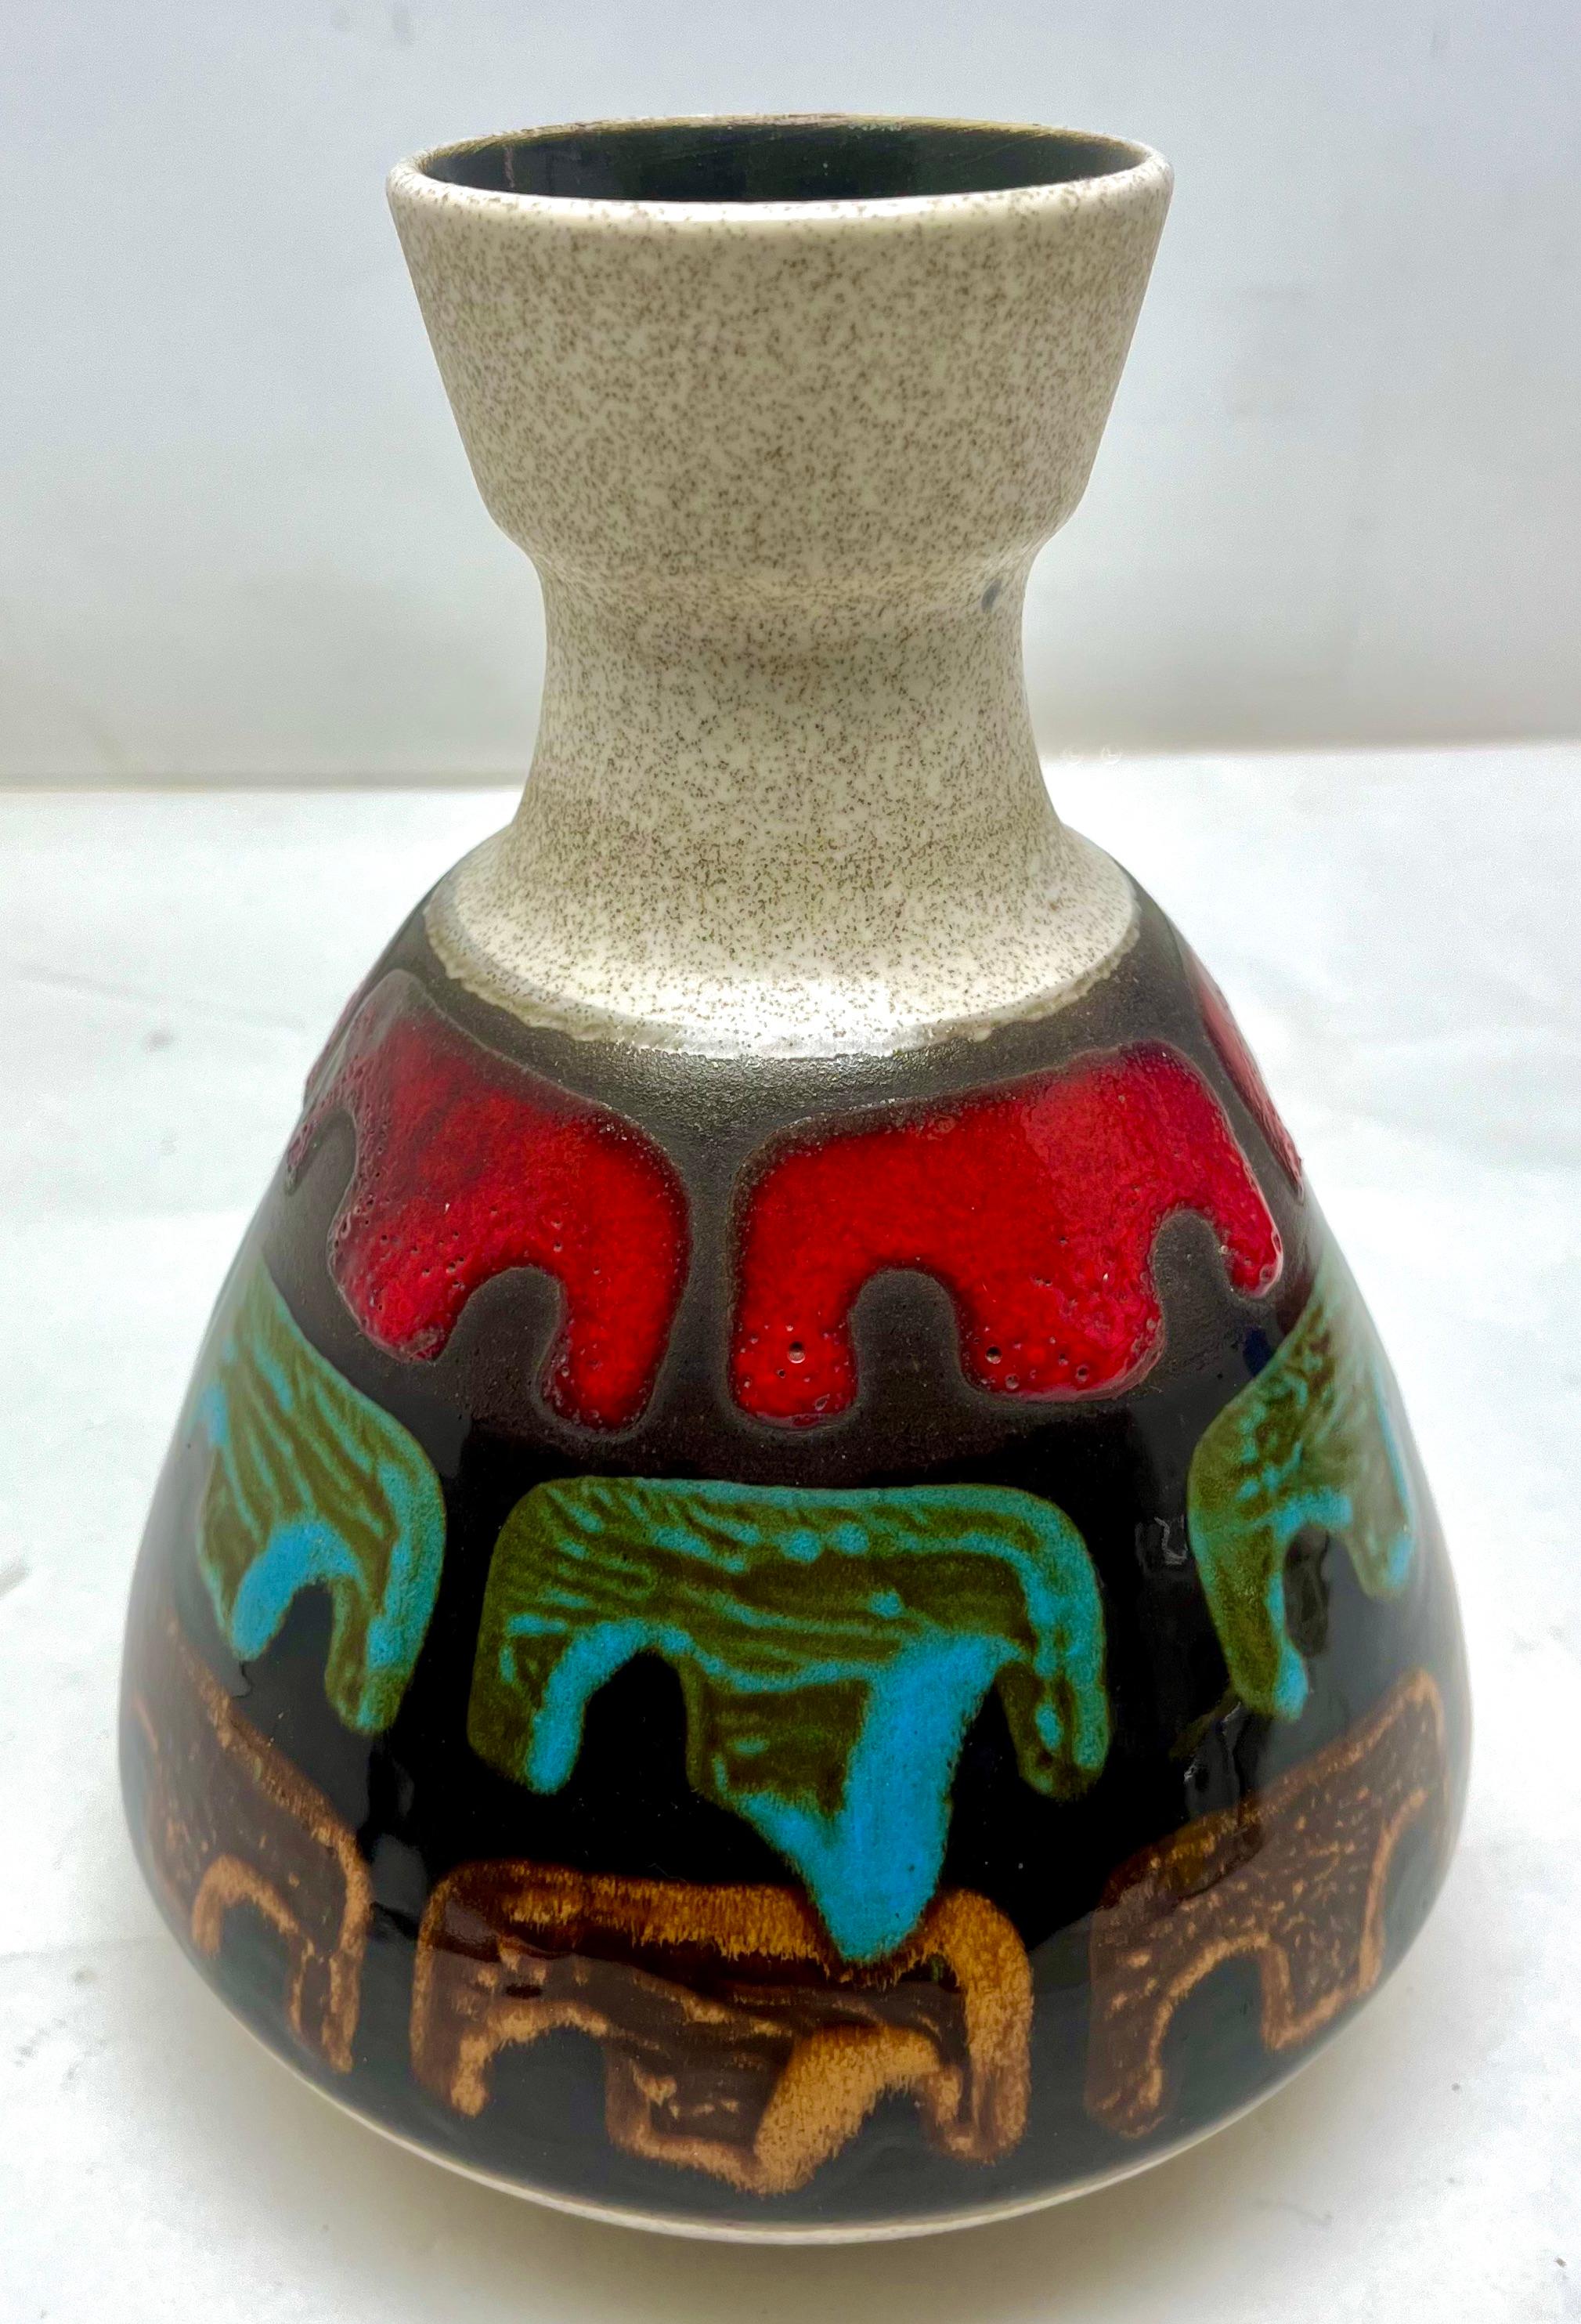 The piece is in excellent condition and a real beauty!
A real treasure for the ceramics' collector. 

There was a lot of craftsmanship and time necessary to make these vases.











